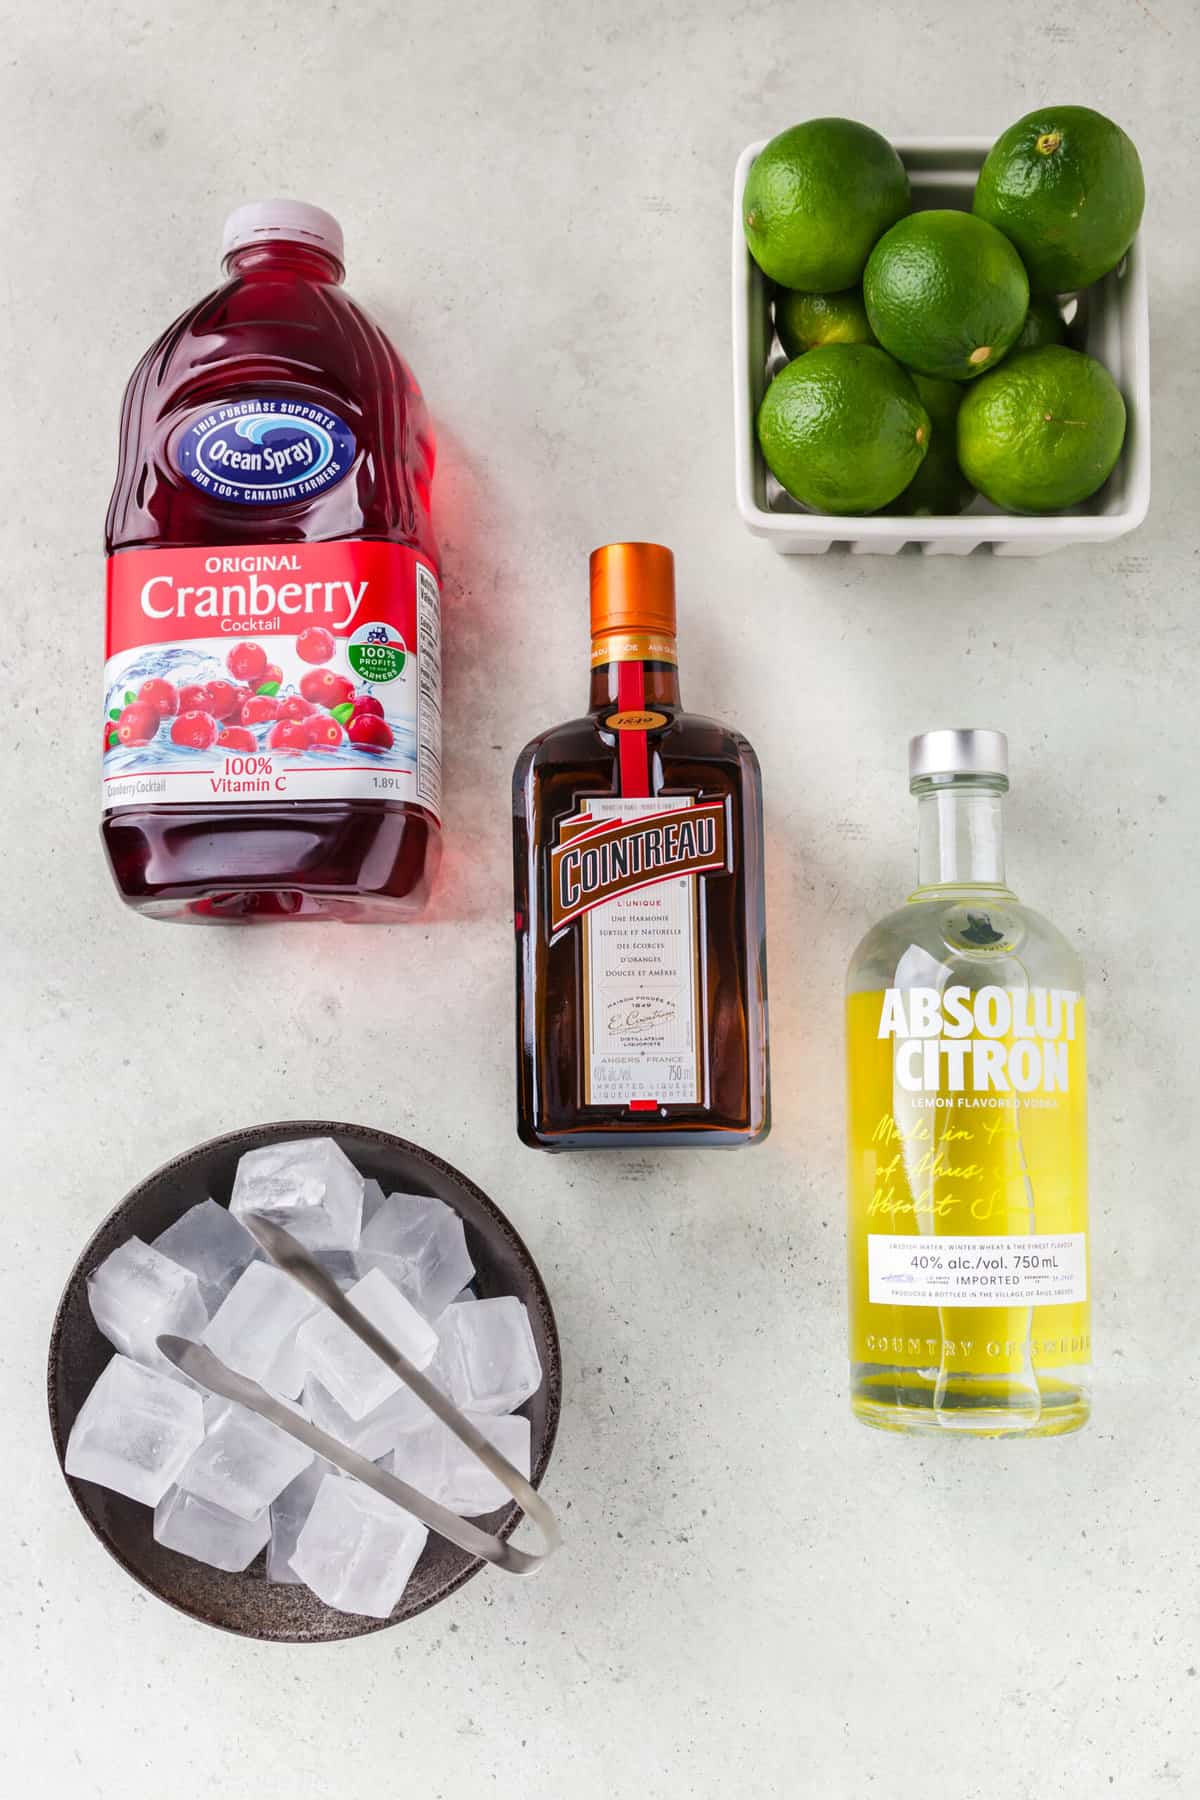 The ingredients for cosmopolitans are placed on a white surface.